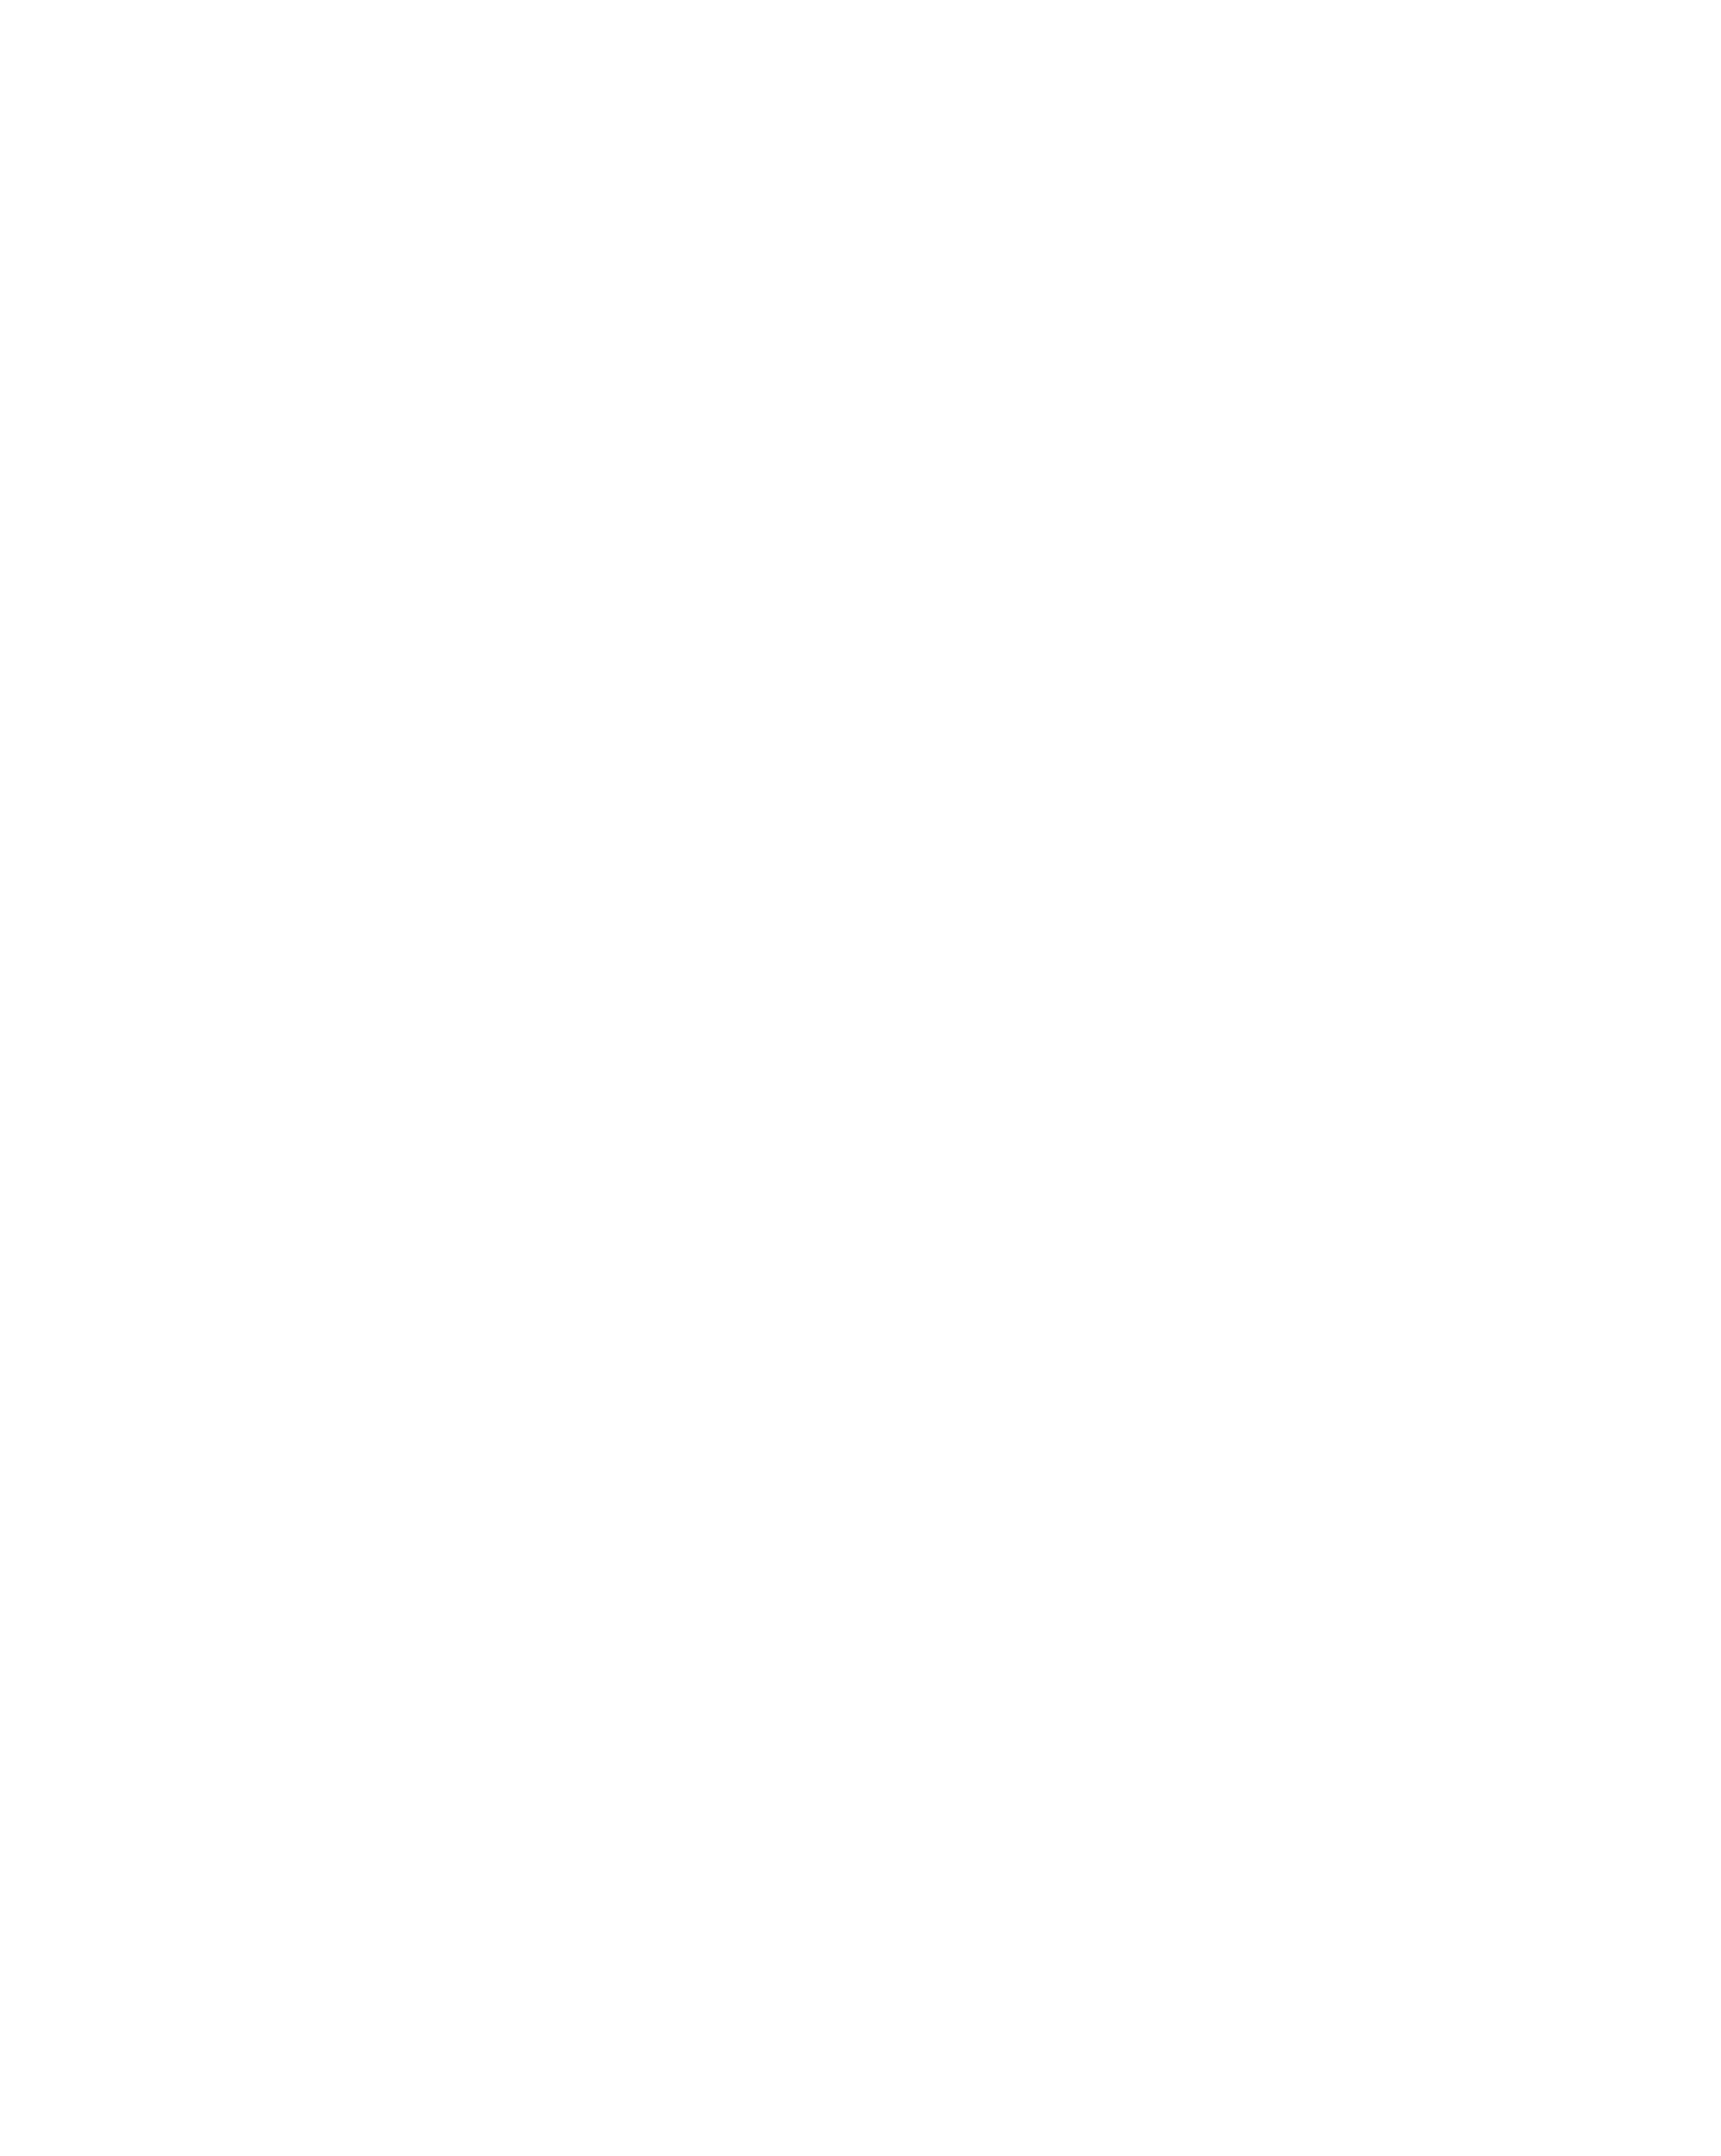 Mission Vector Image